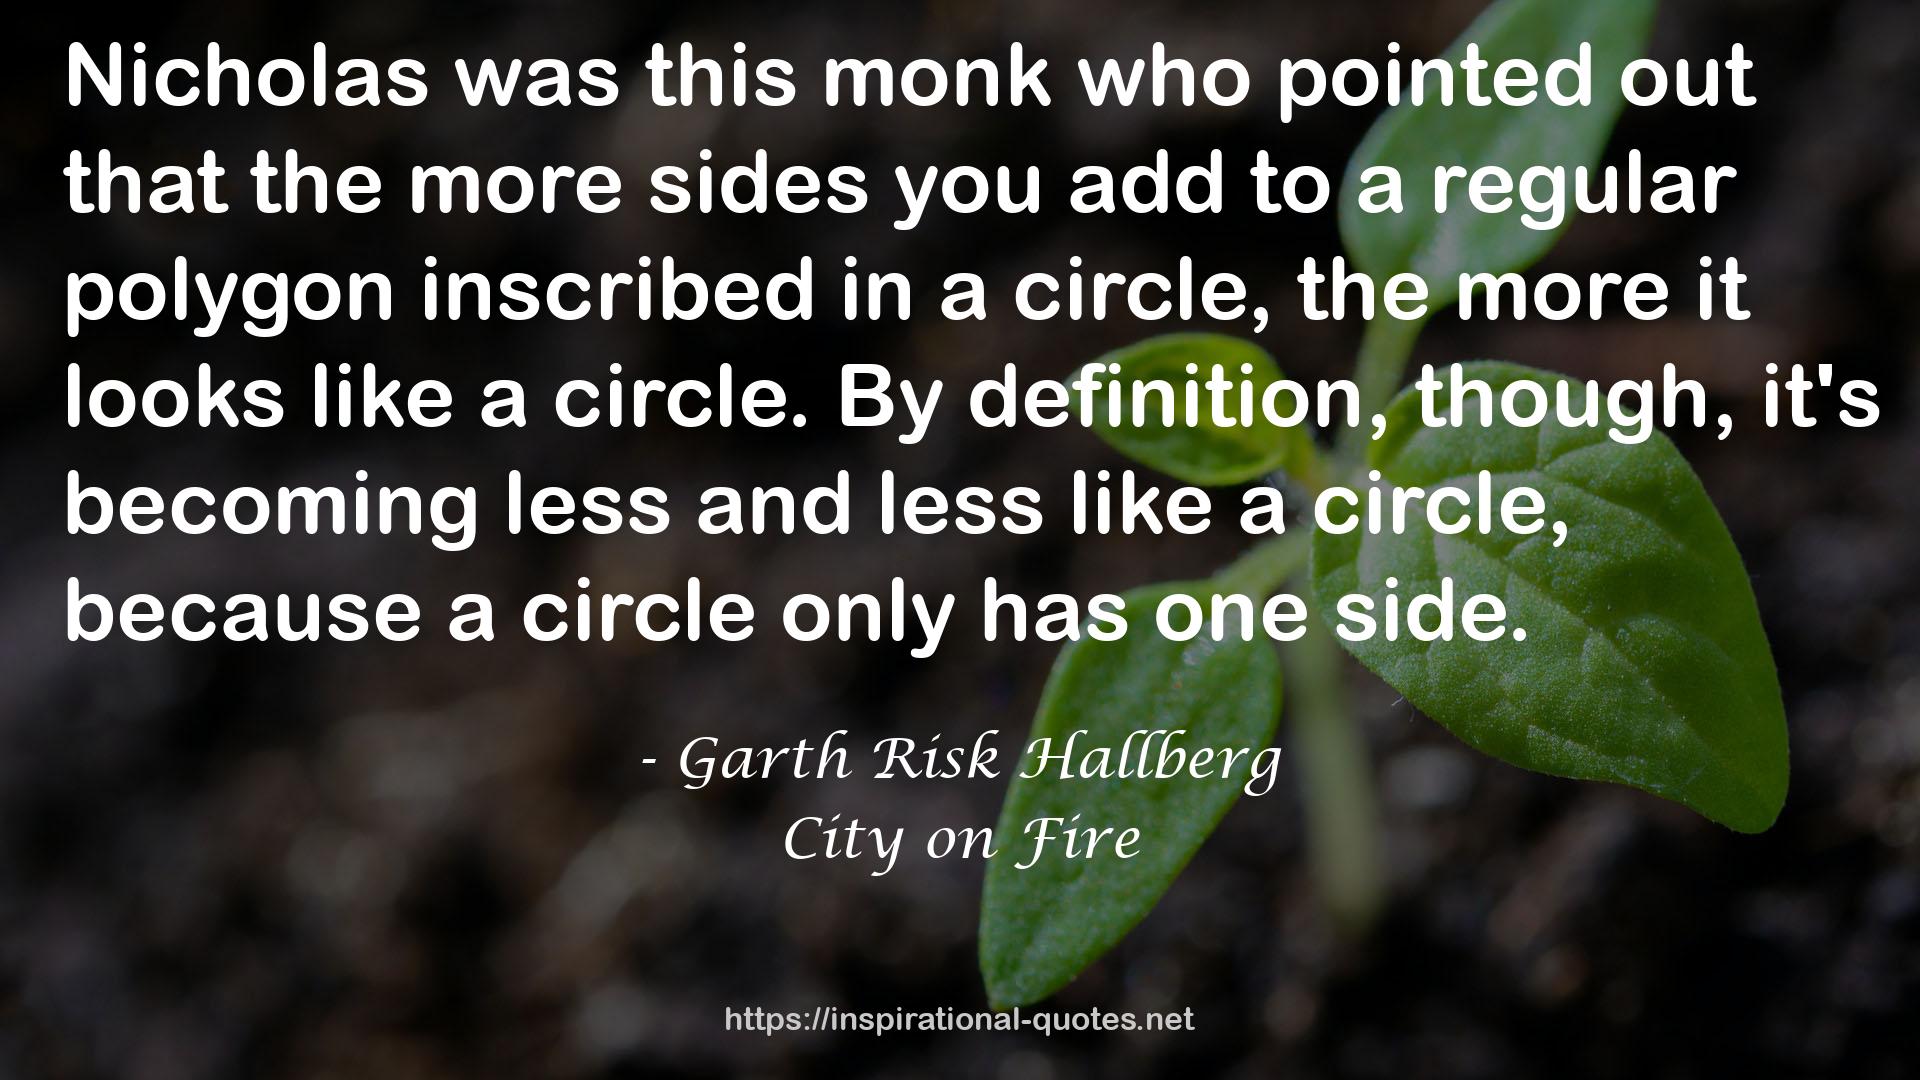 City on Fire QUOTES